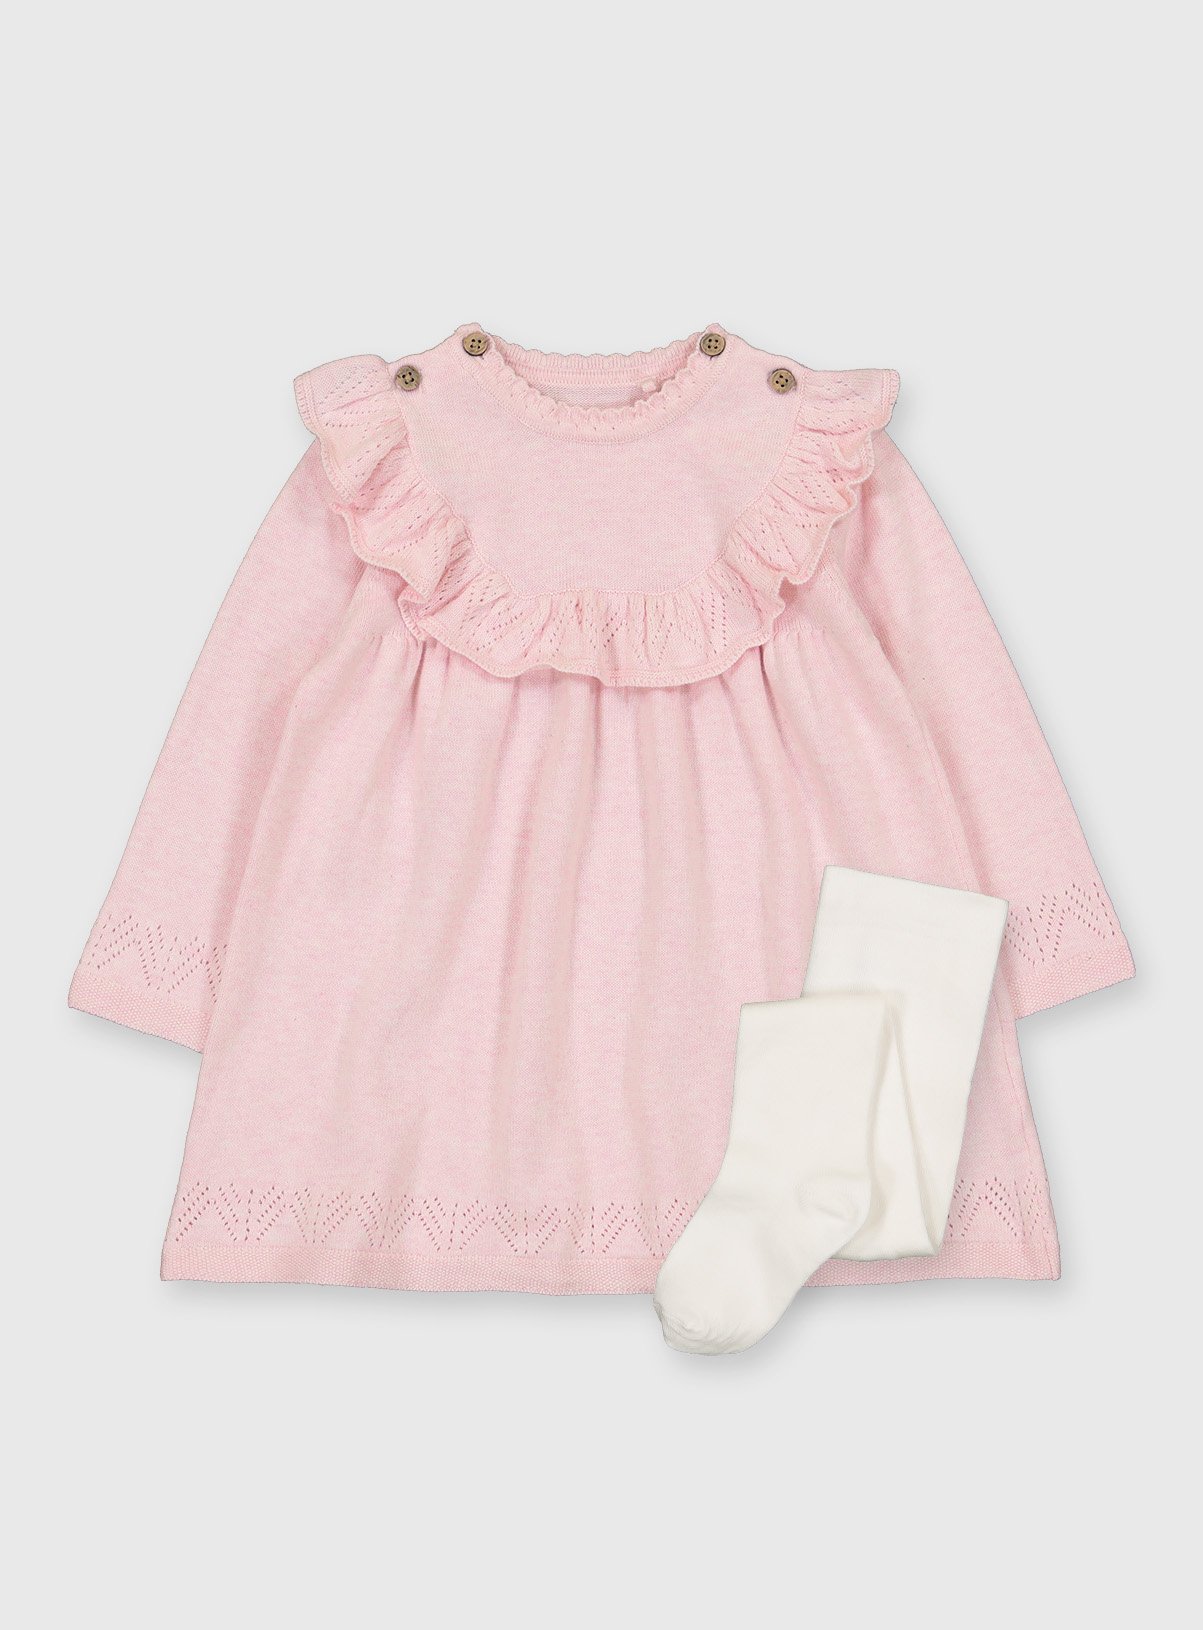 baby girl clothes next day delivery